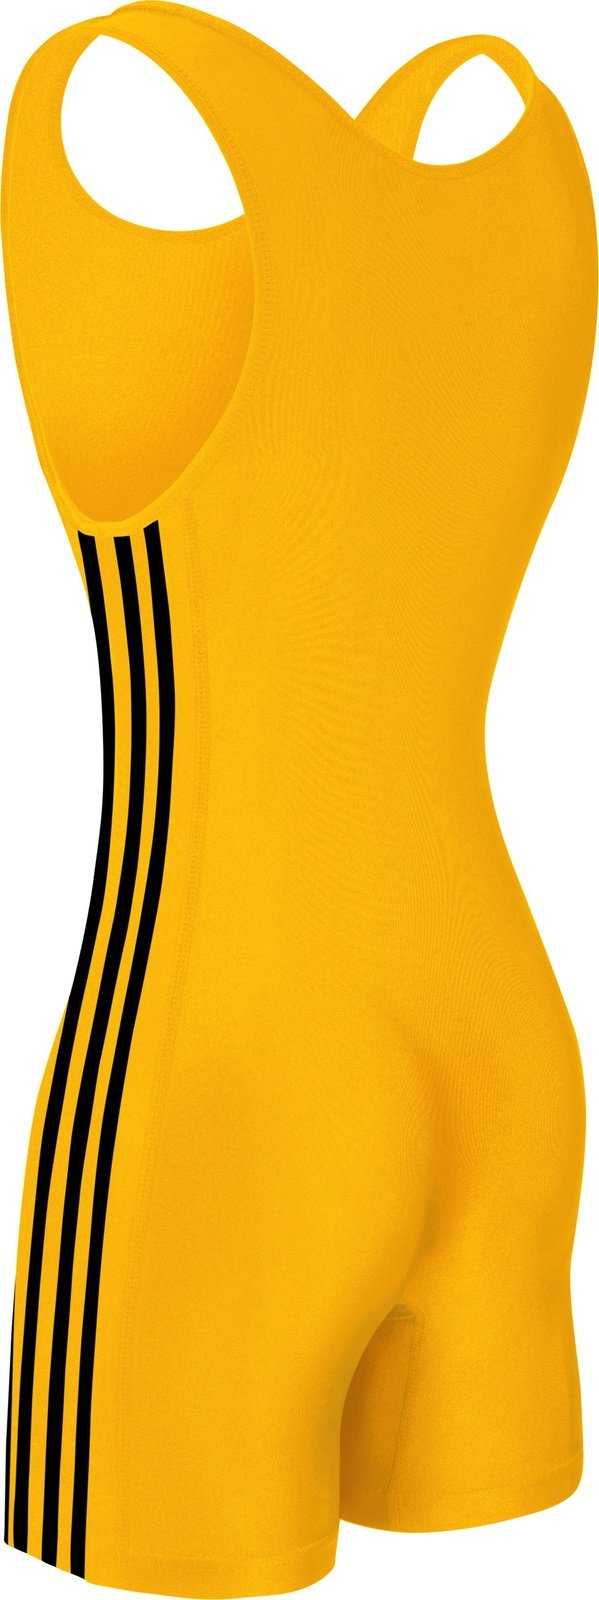 Adidas aS102s 3 Stripe Wrestling Singlet - Athletic Gold Black - HIT a Double